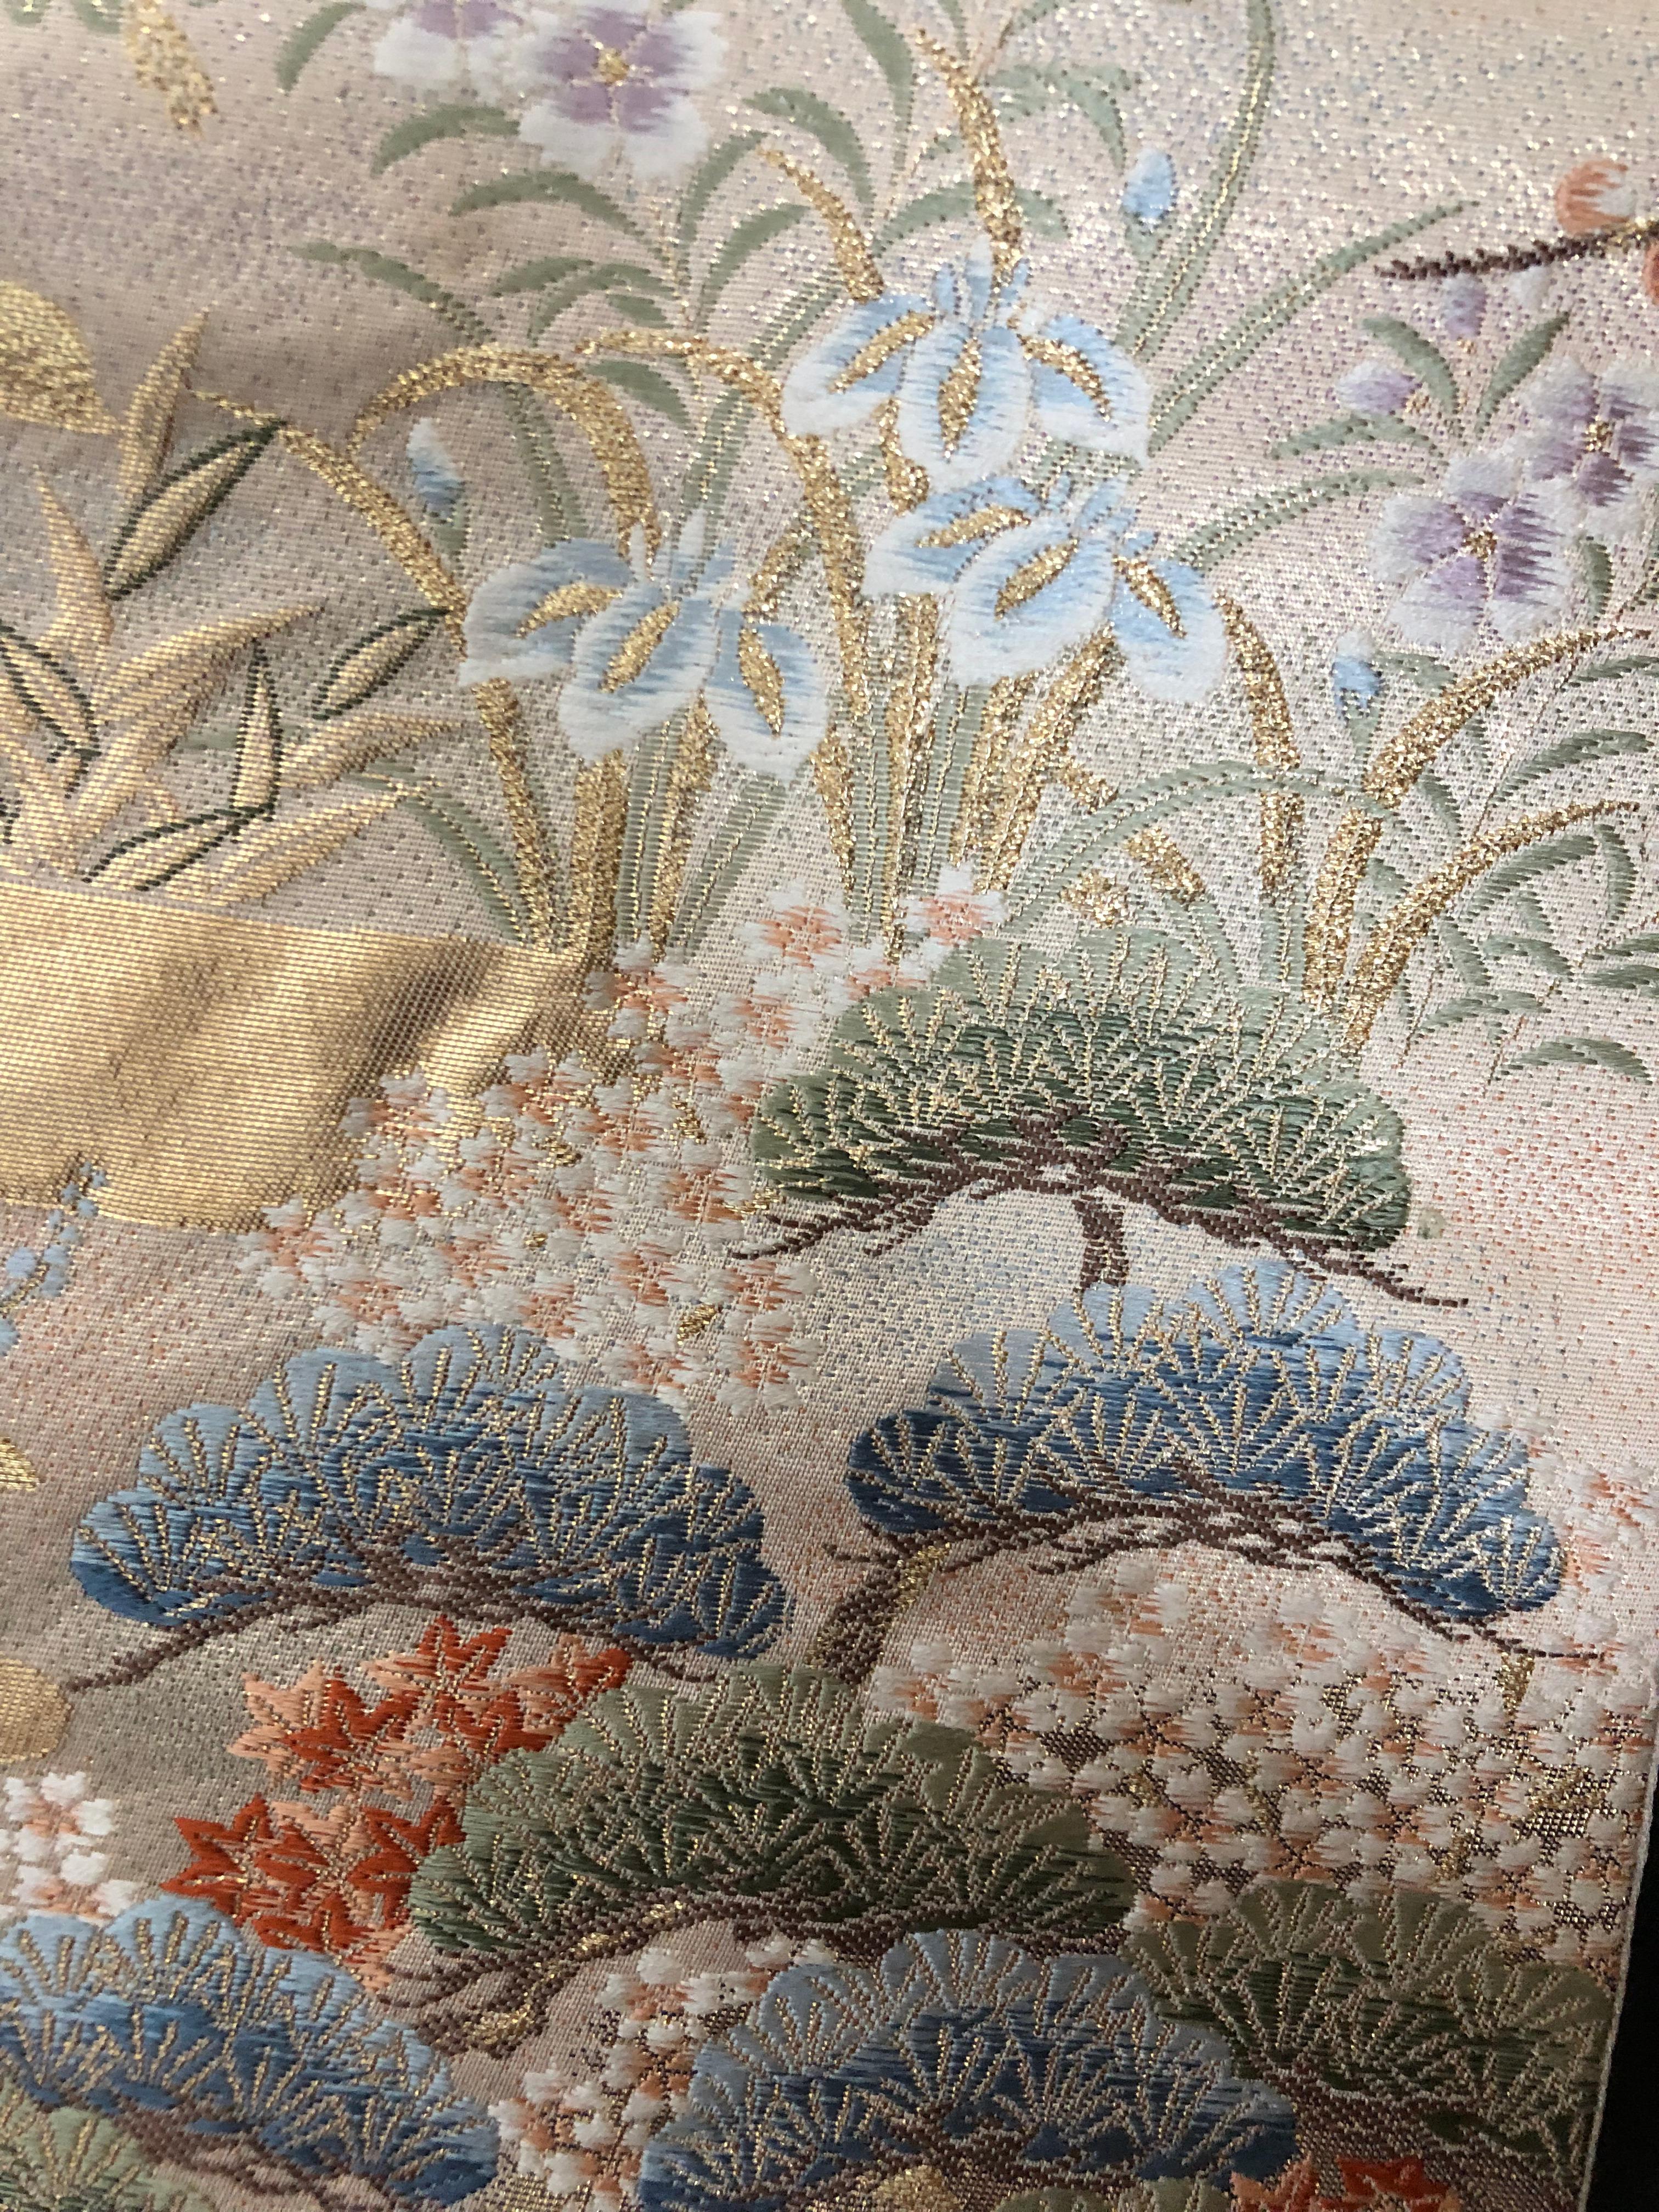 Hand-Crafted Kimono Art / Japanese Art / Wall Decoration -Temple Garden in a Riot of Blooms- For Sale